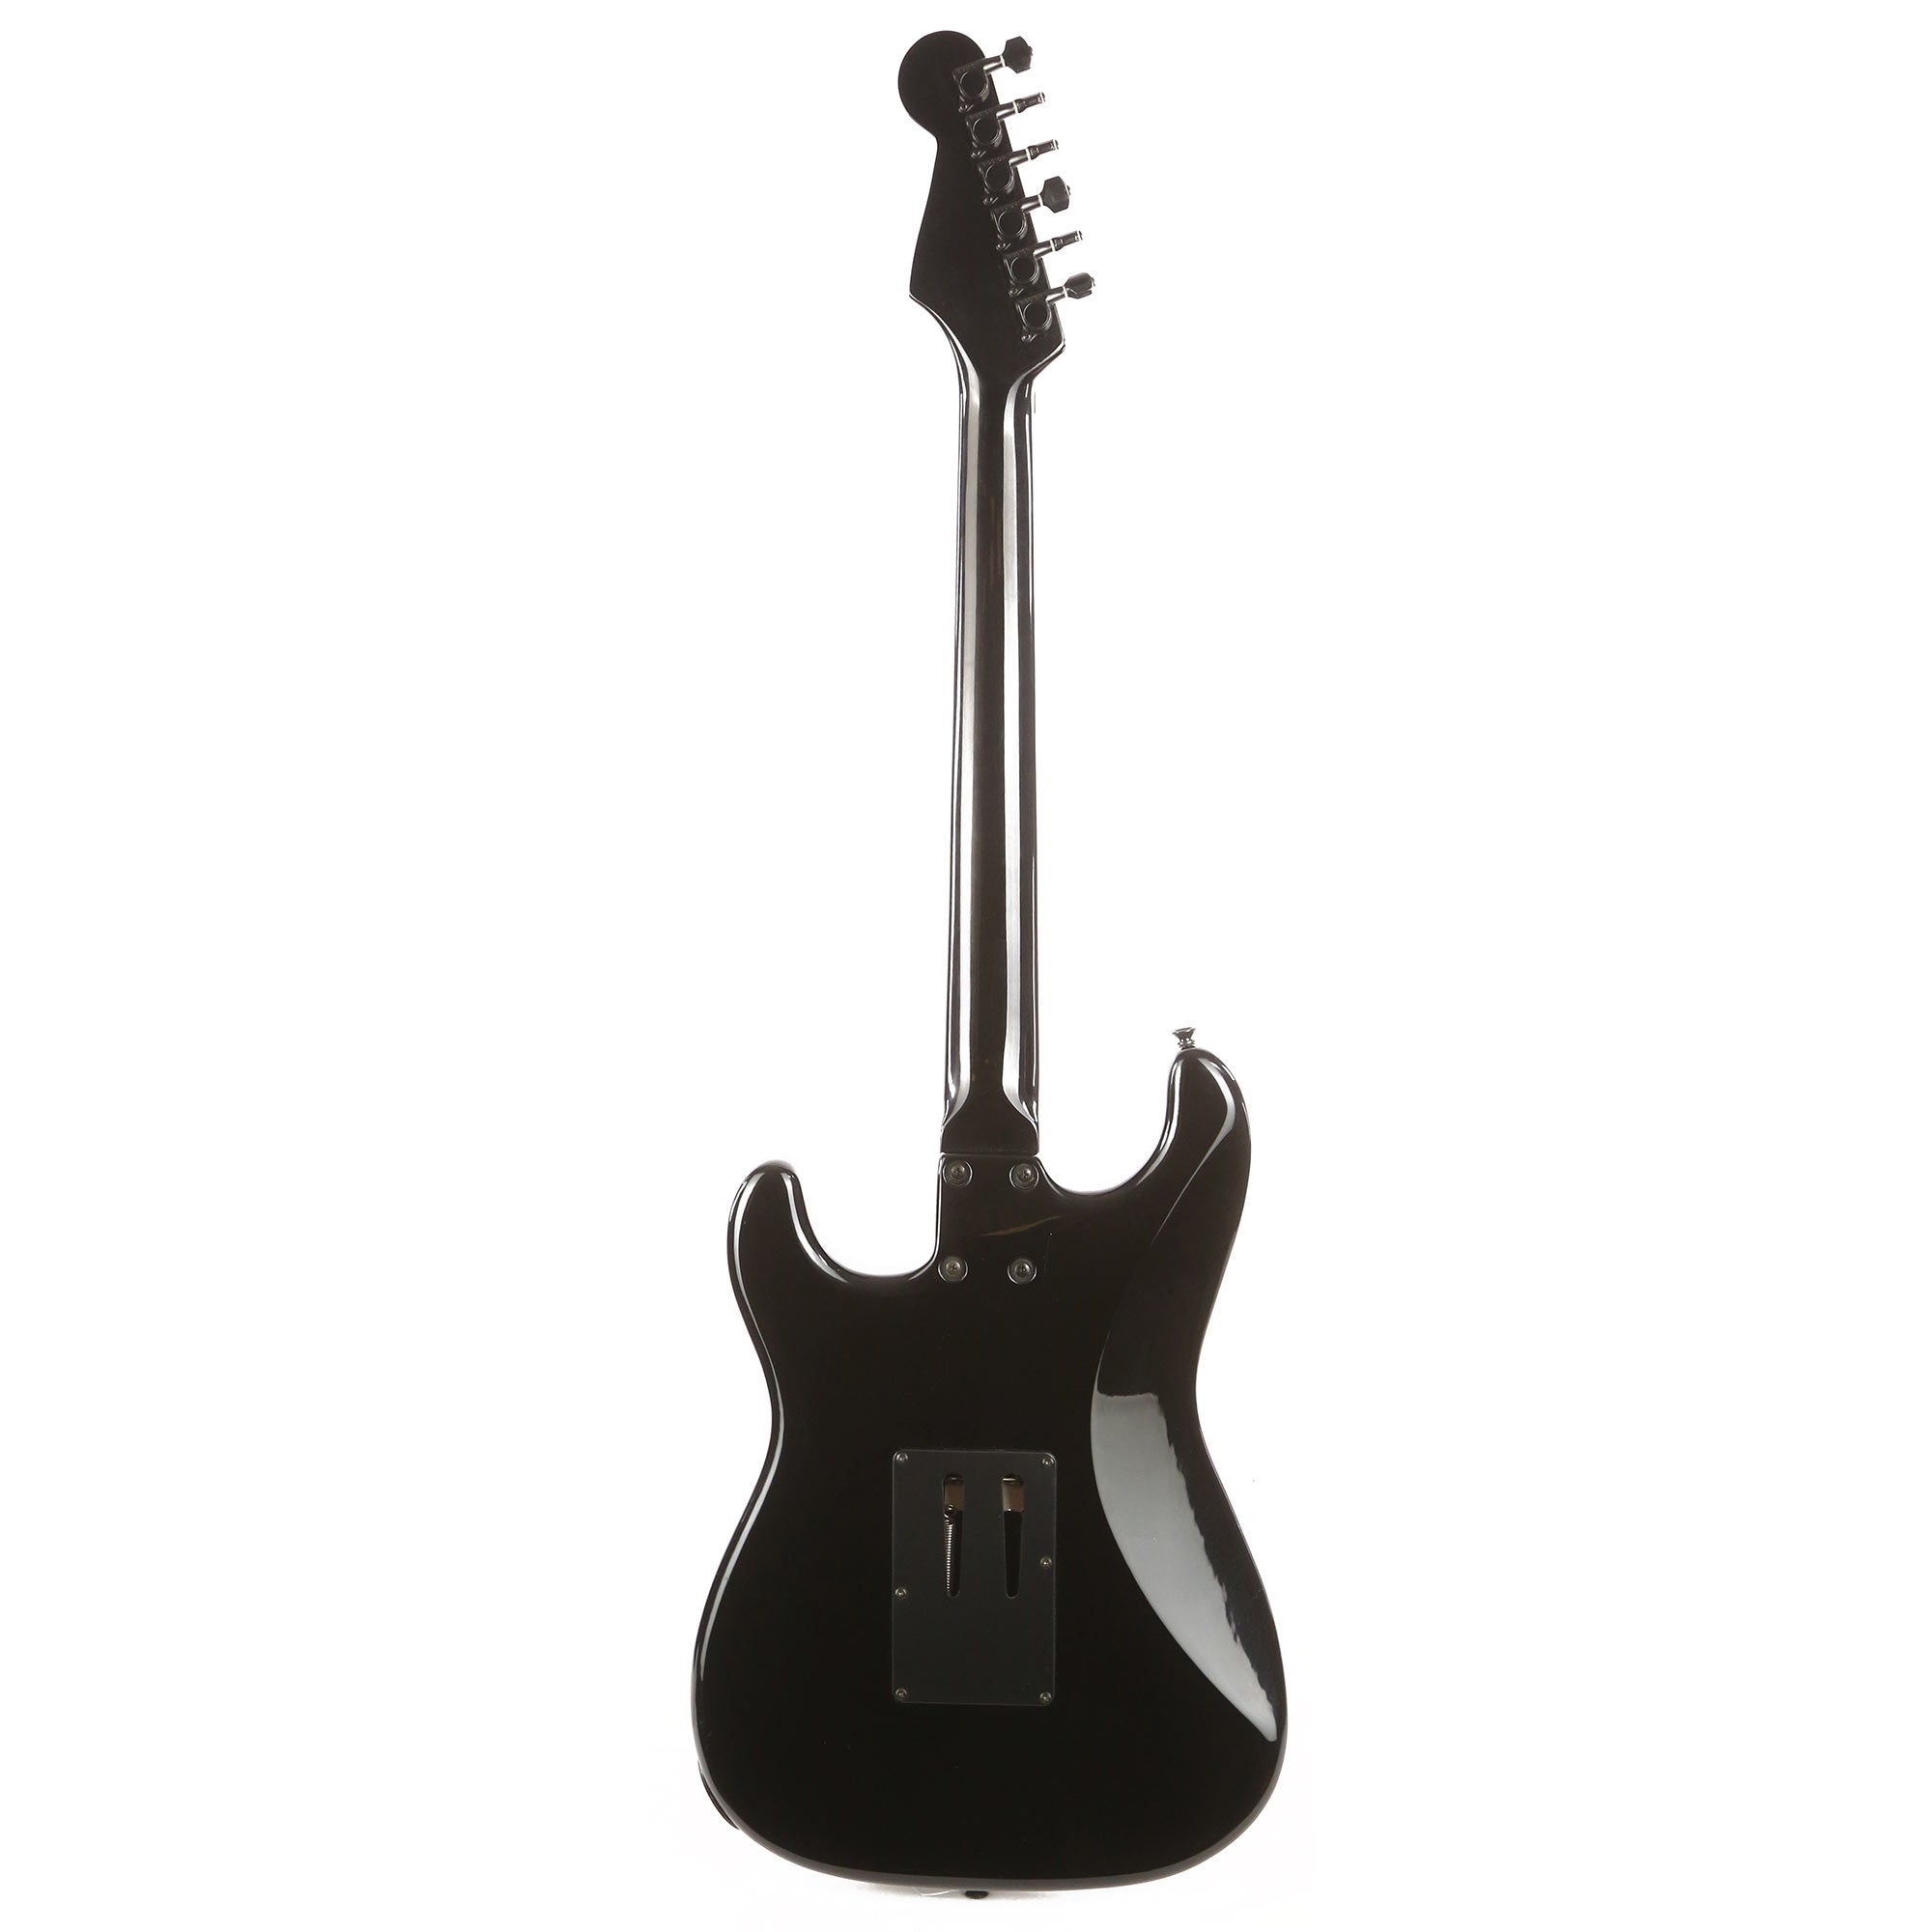 Fernandes The Function MIJ Guitar Black Used | The Music Zoo